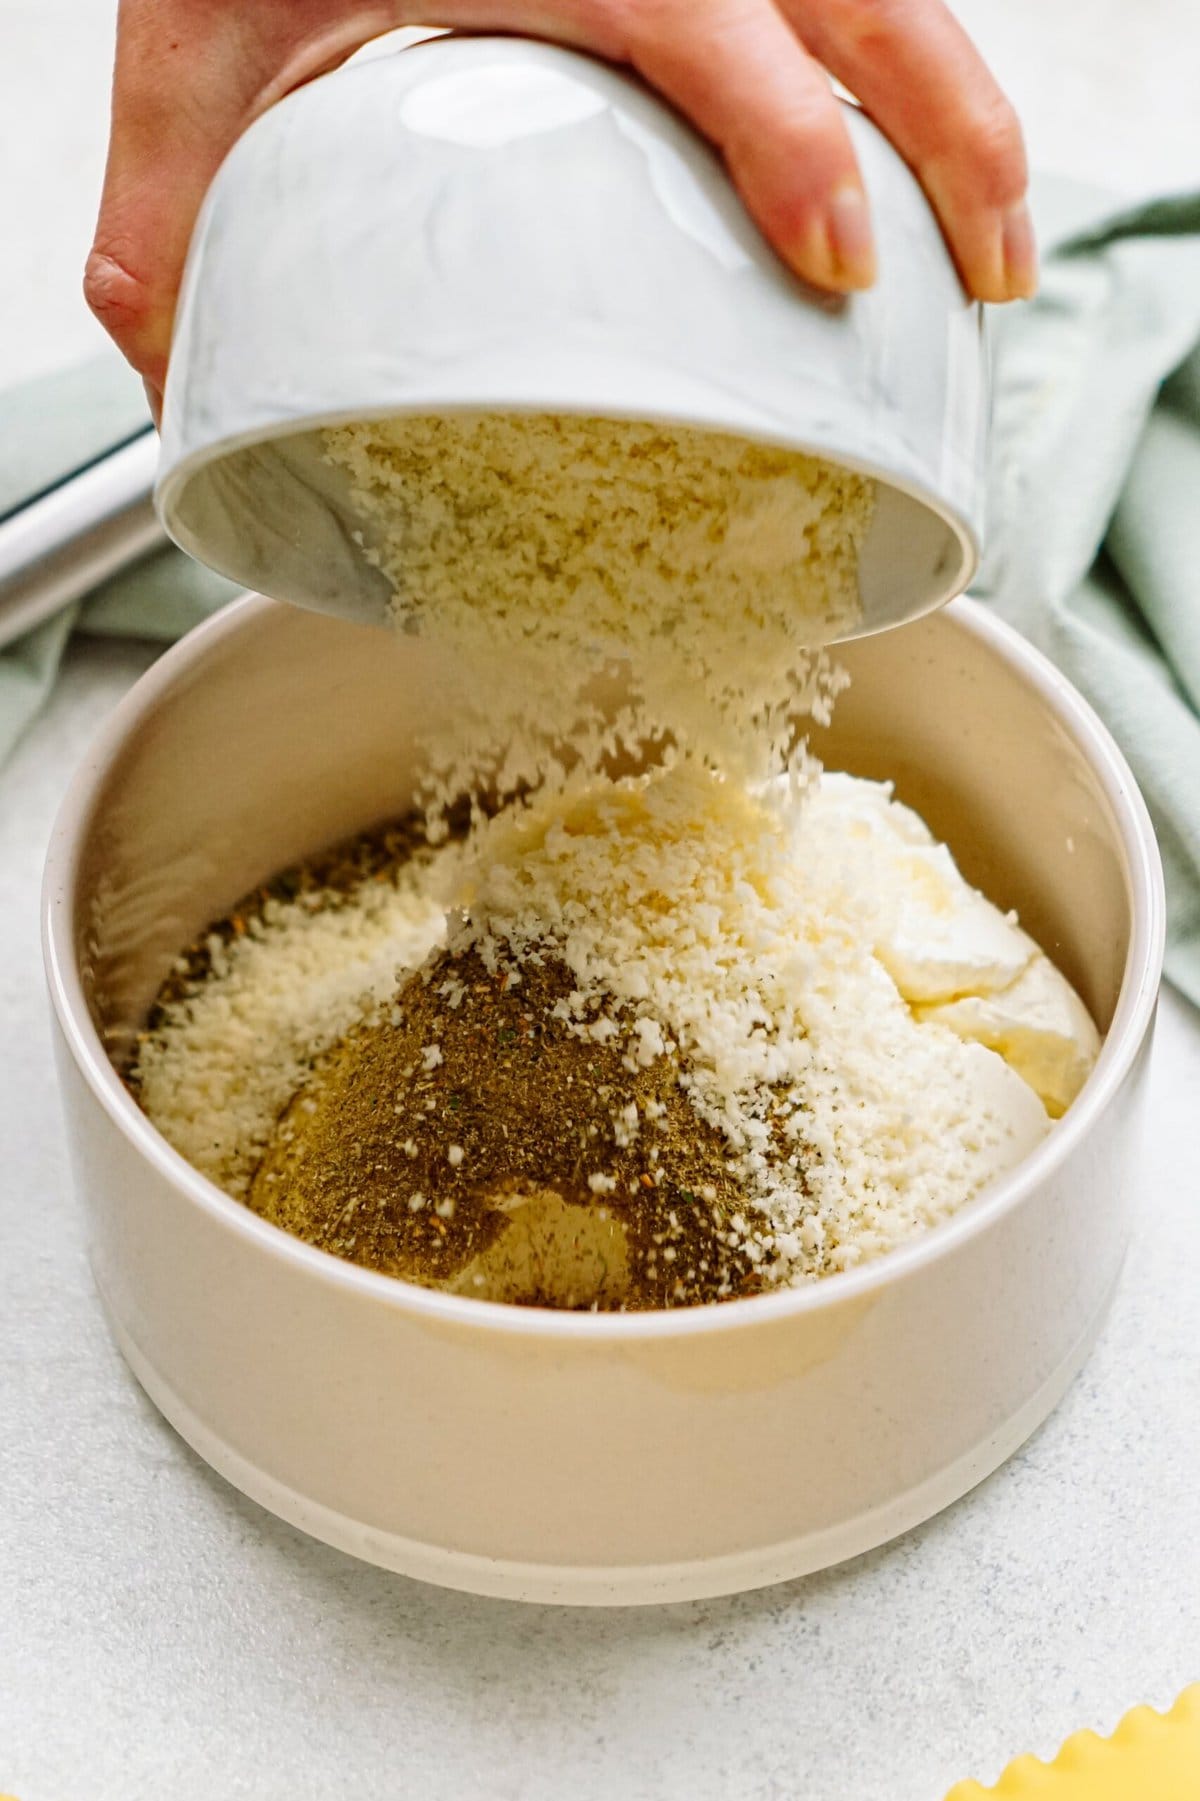 A hand is pouring breadcrumbs and seasonings into a mixing bowl with other ingredients.